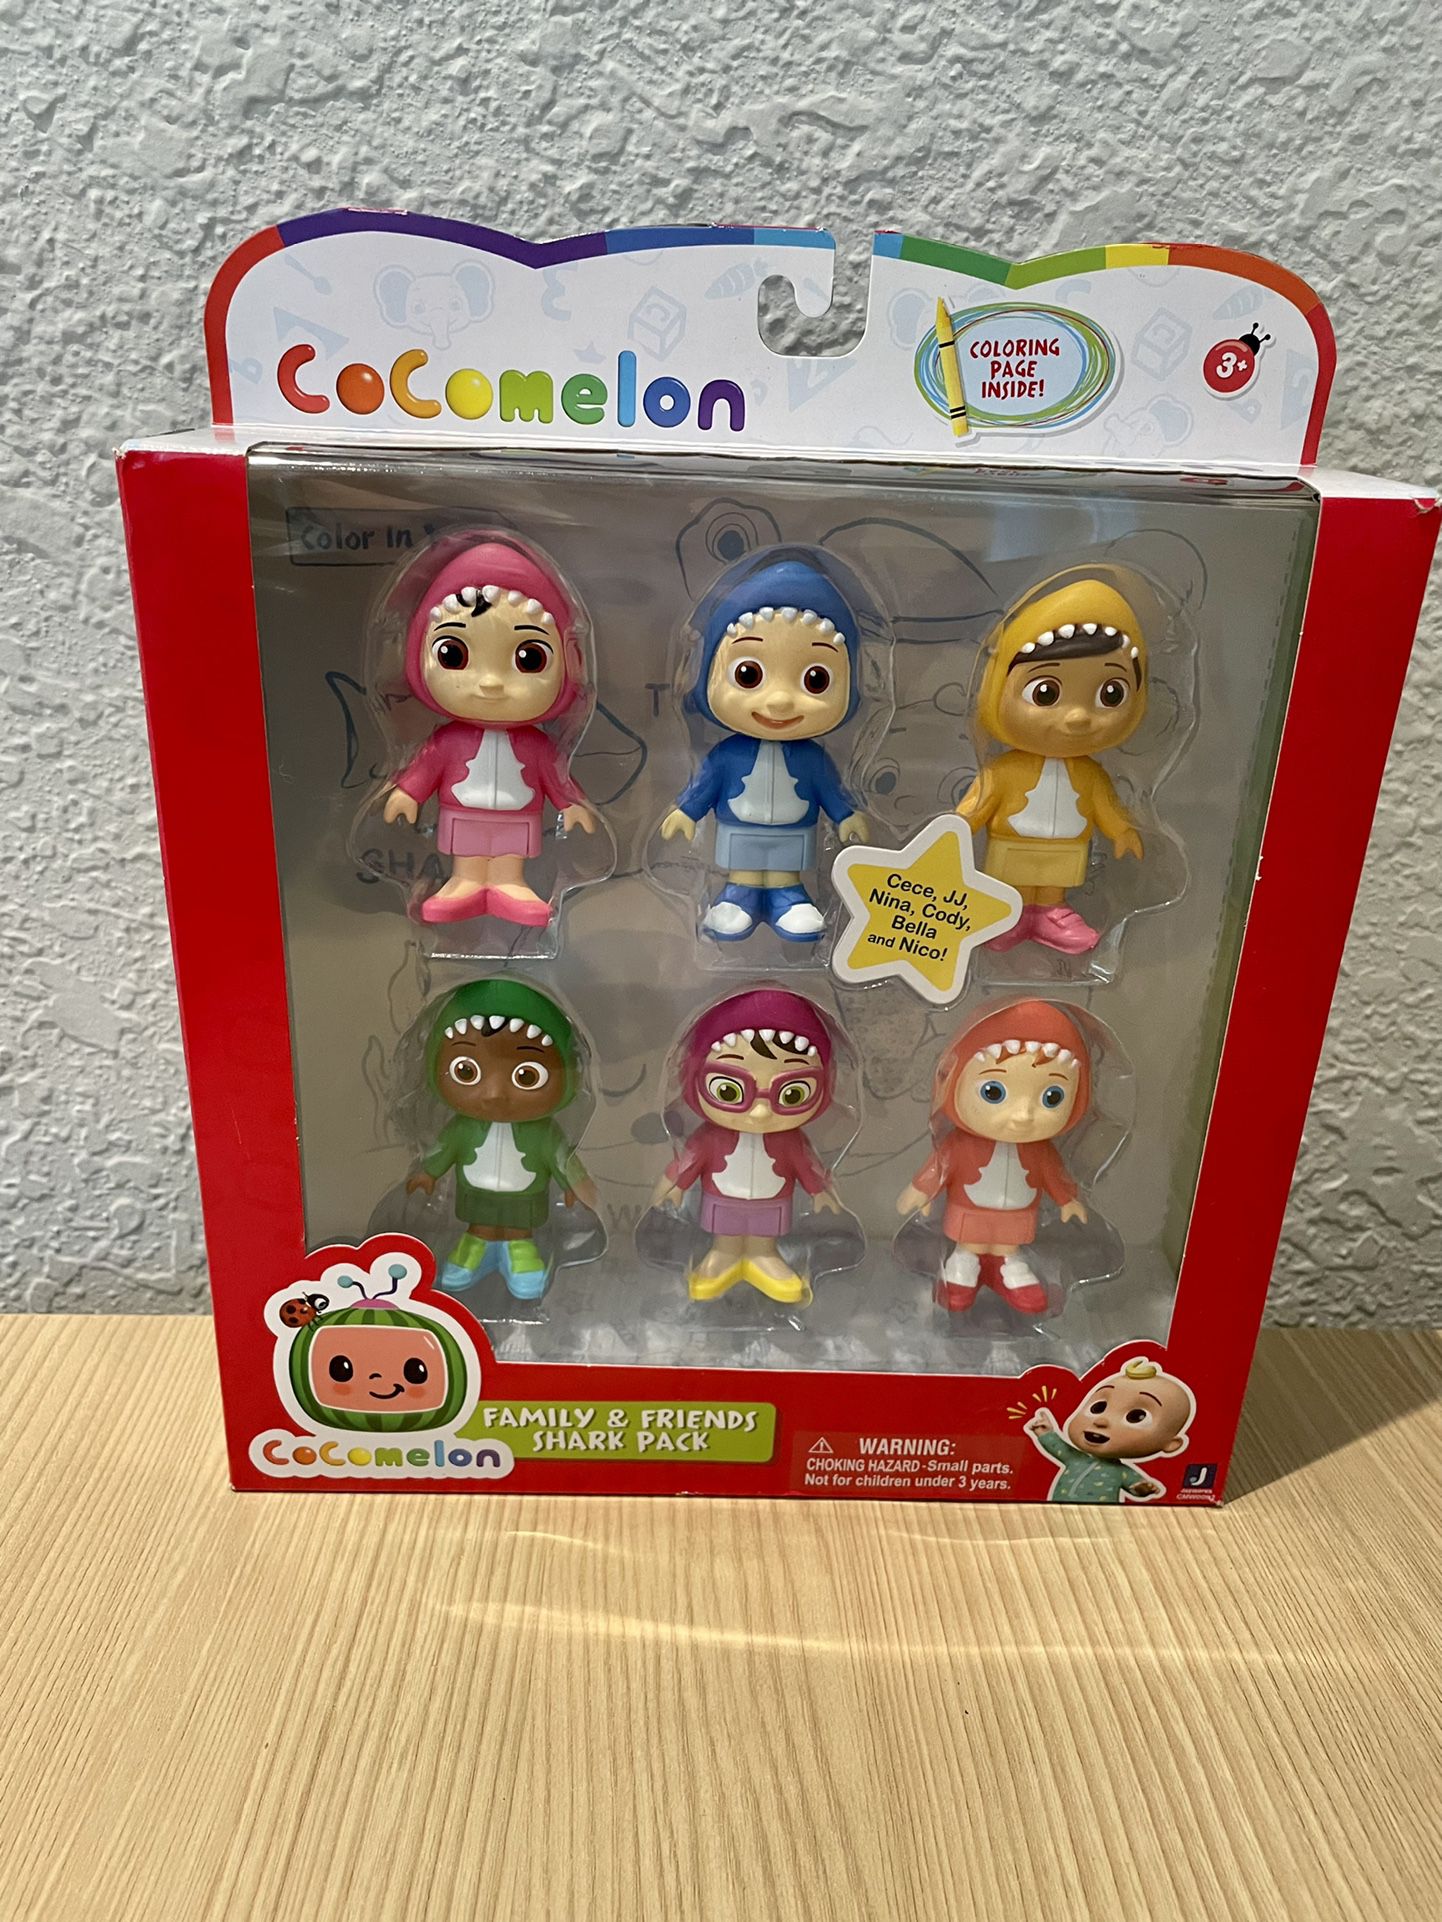 Cocomelon Family & Friends Shark Pack